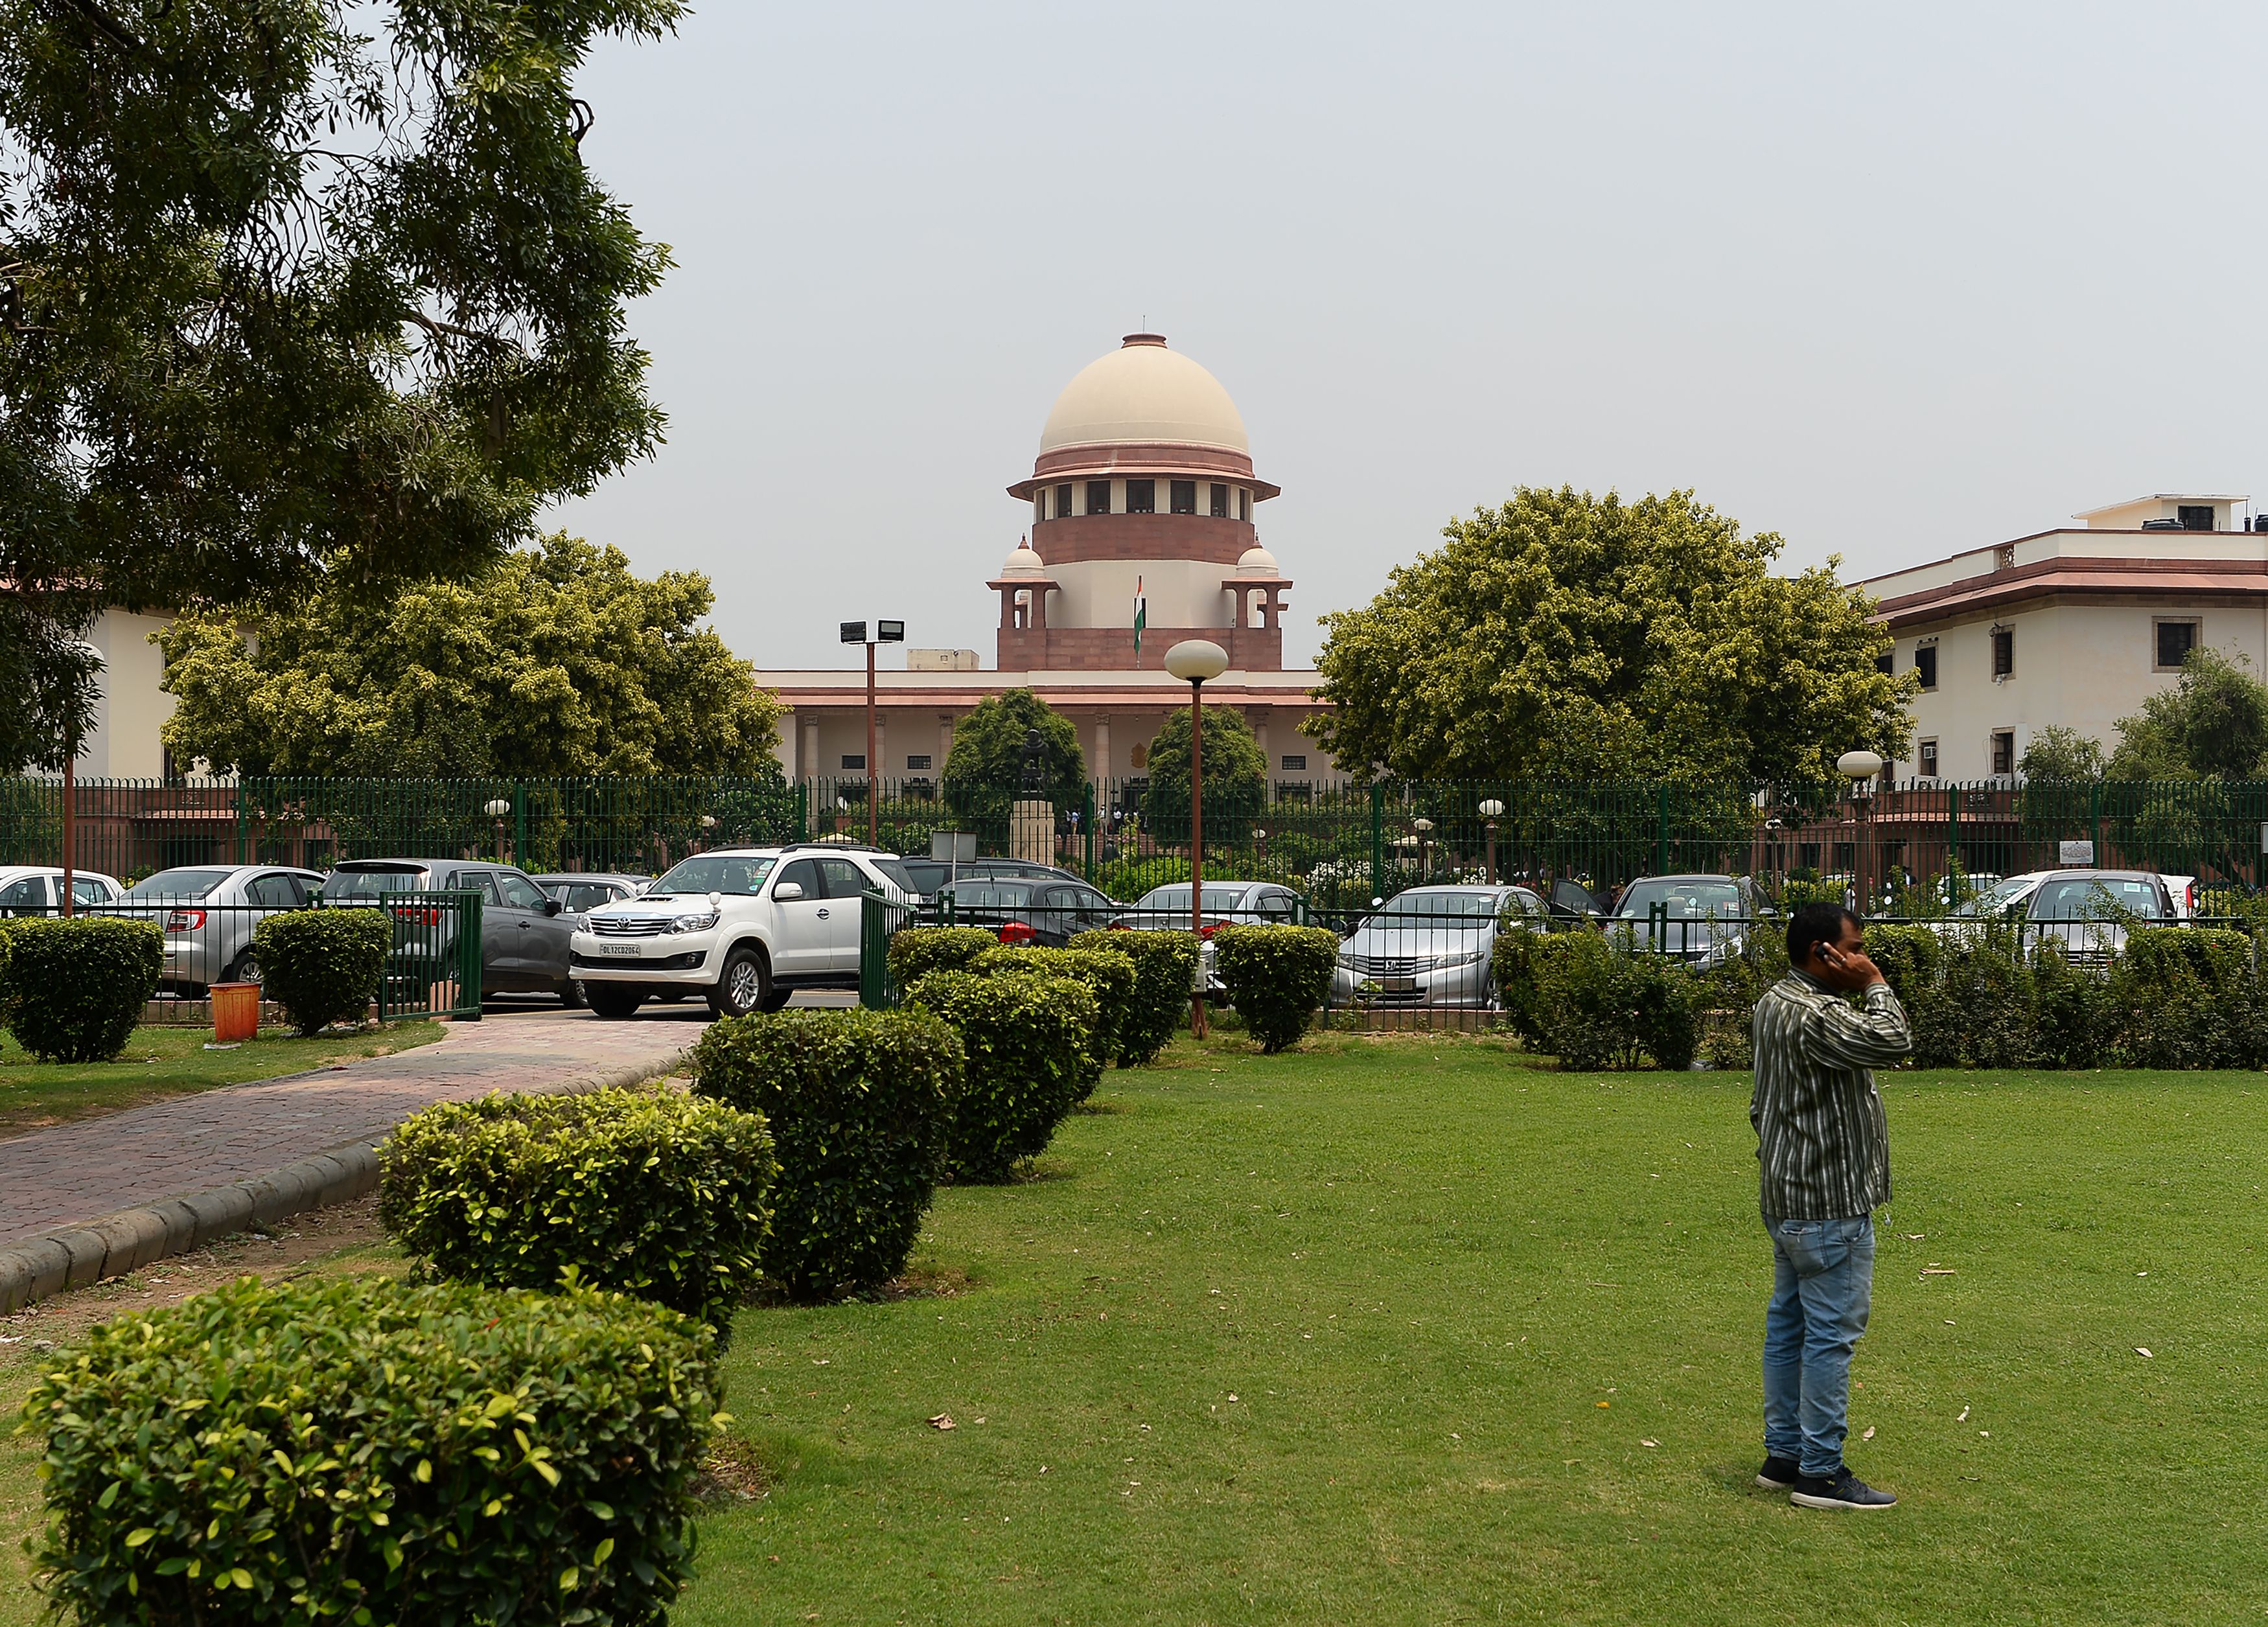 File: The Indian Supreme Court building is pictured in New Delhi on 10 July 2018.